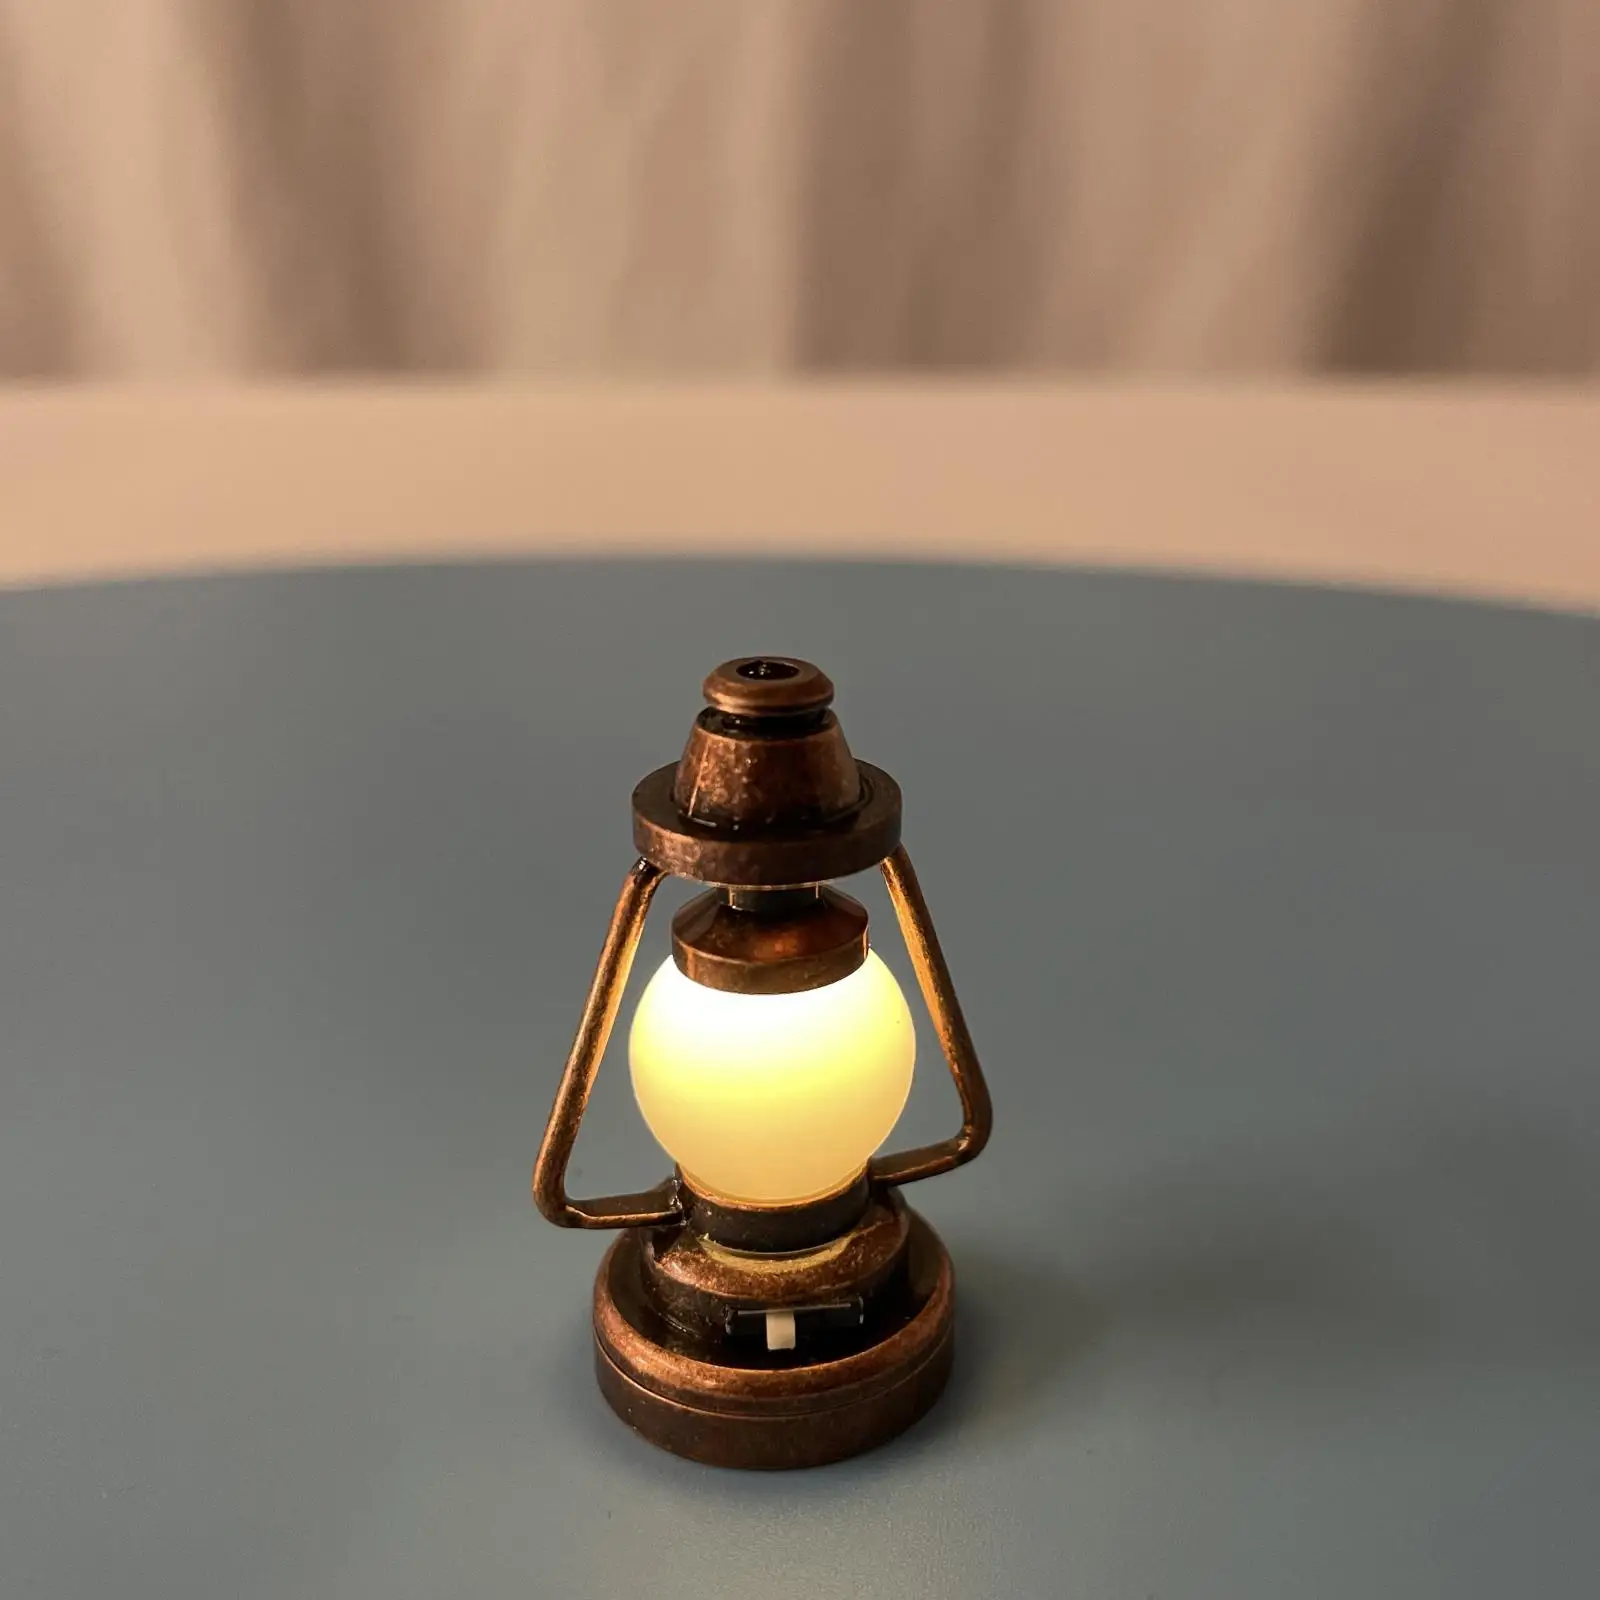 1:12 Dollhouse Lantern Battery Operated Lamp Light LED Miniature Retro Dollhouse Accessories Doll House Decoration Toy Model